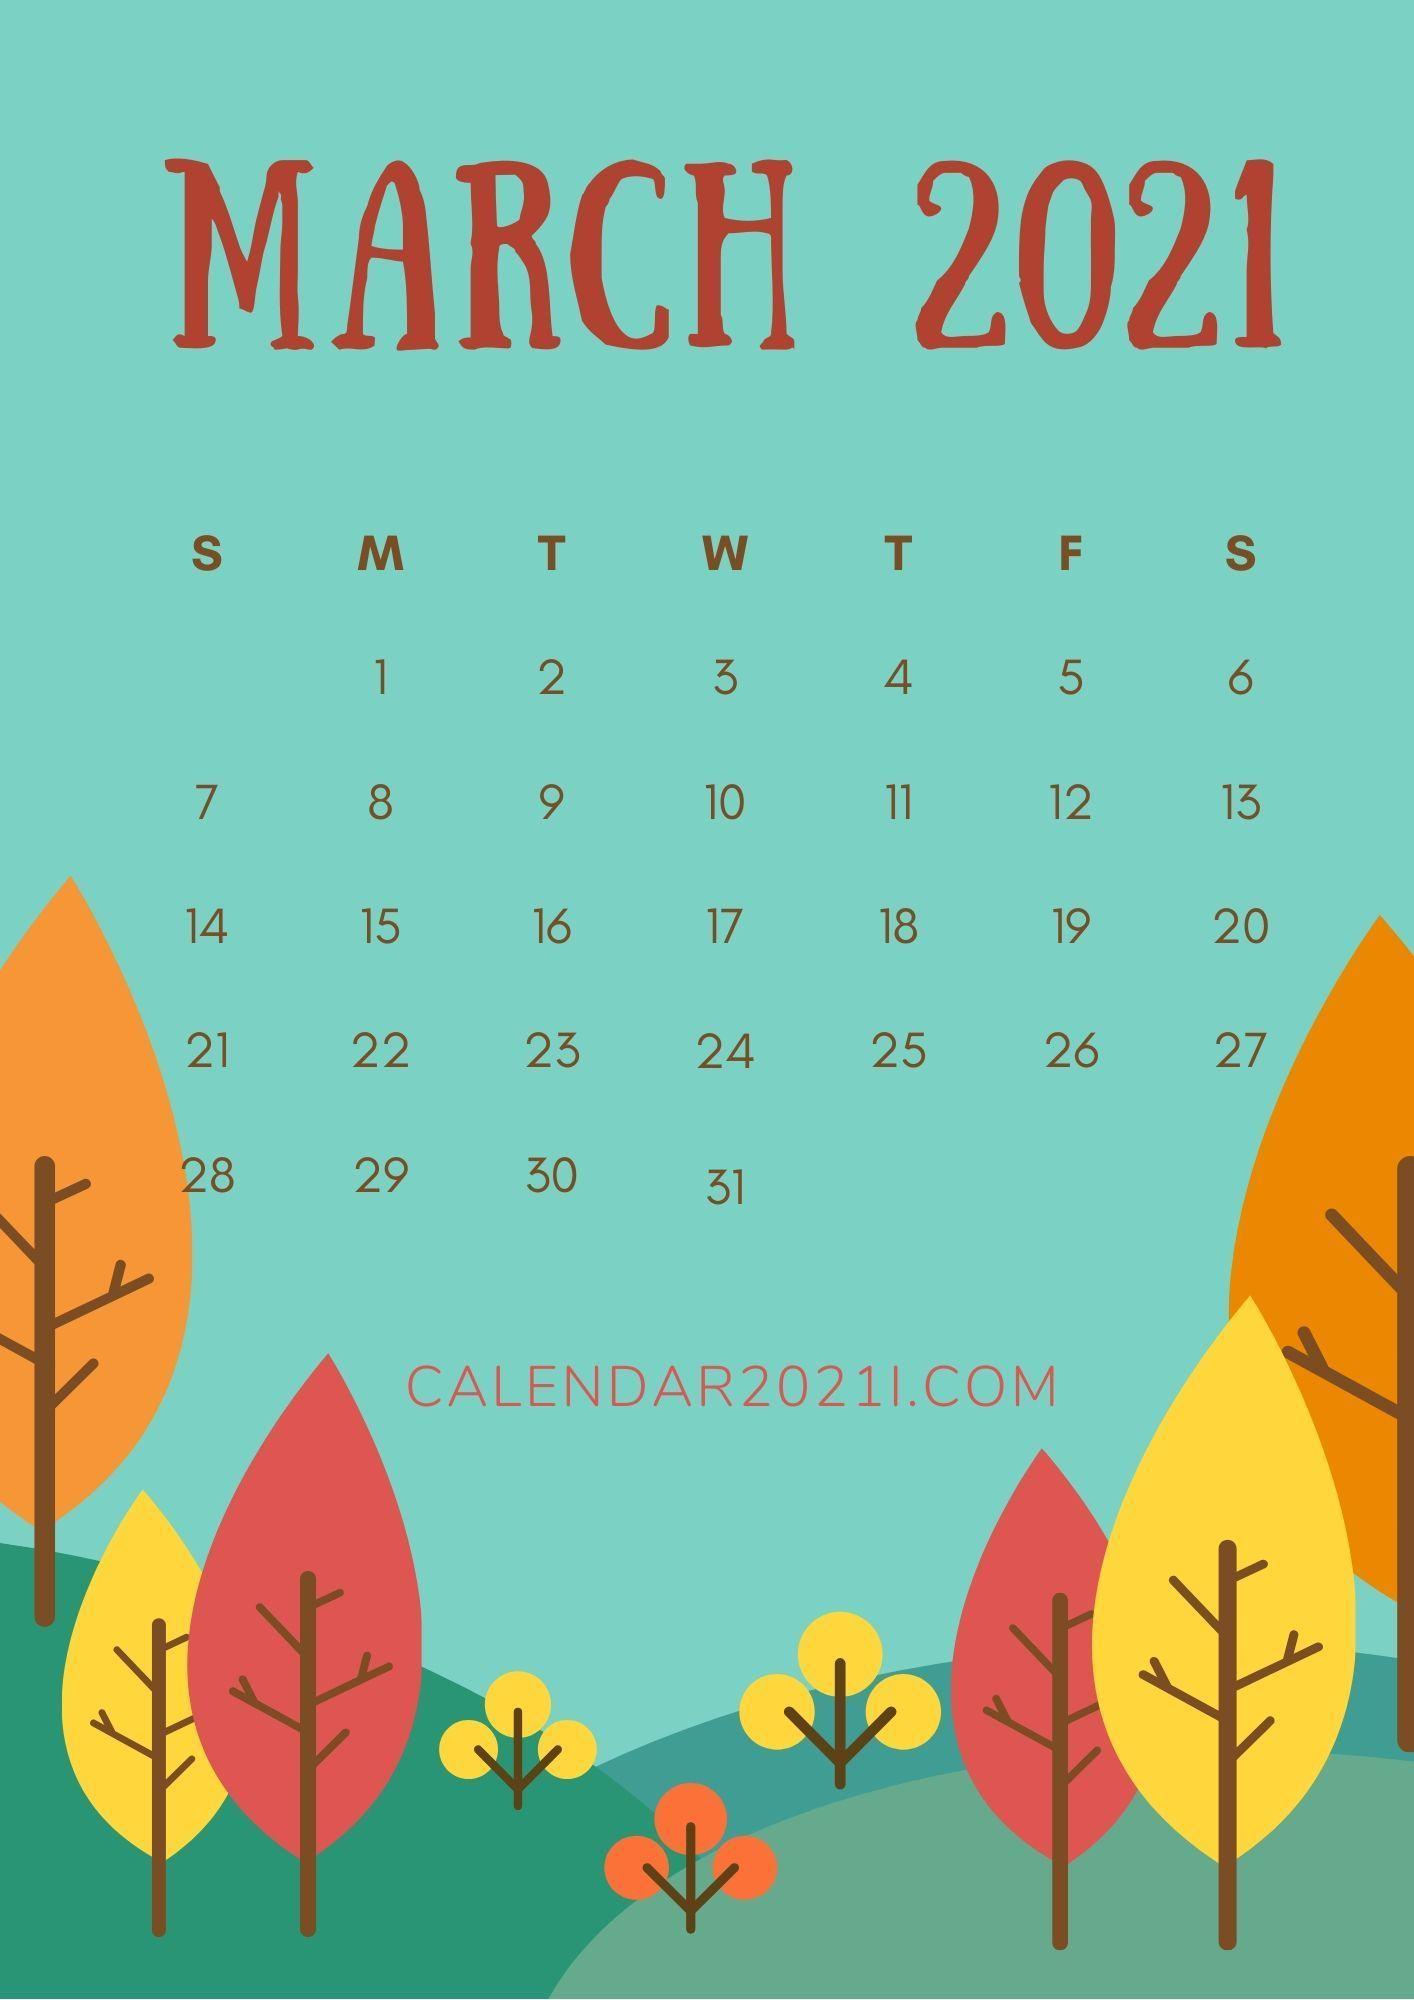 March 2021 Calendar Wallpapers - Top Free March 2021 ...